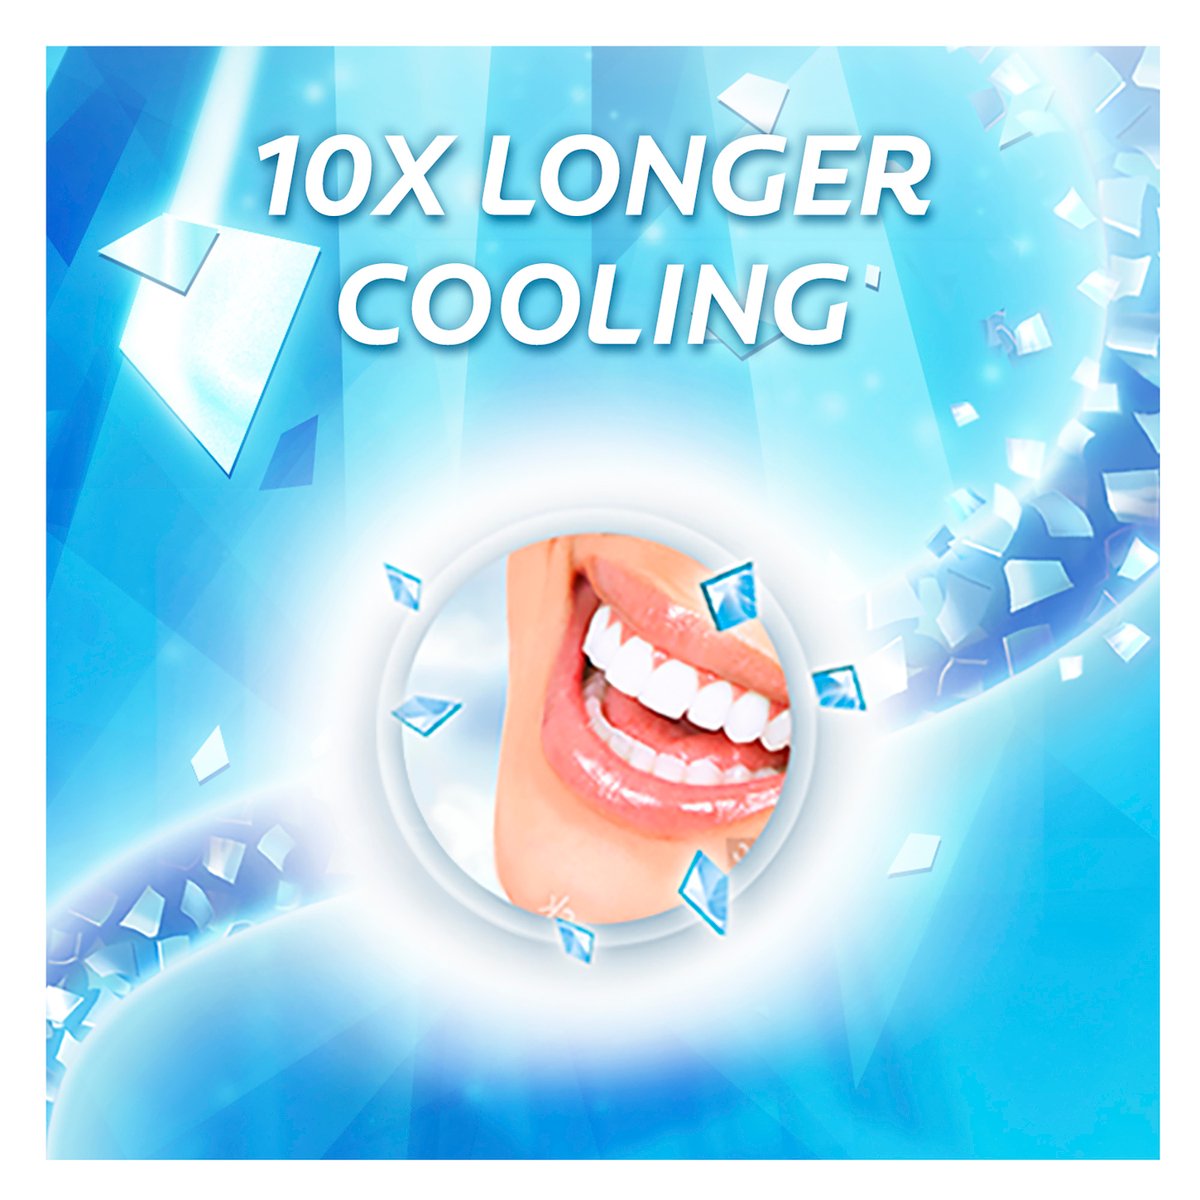 Colgate Fluoride Toothpaste Max Fresh Cool Mint 100 ml